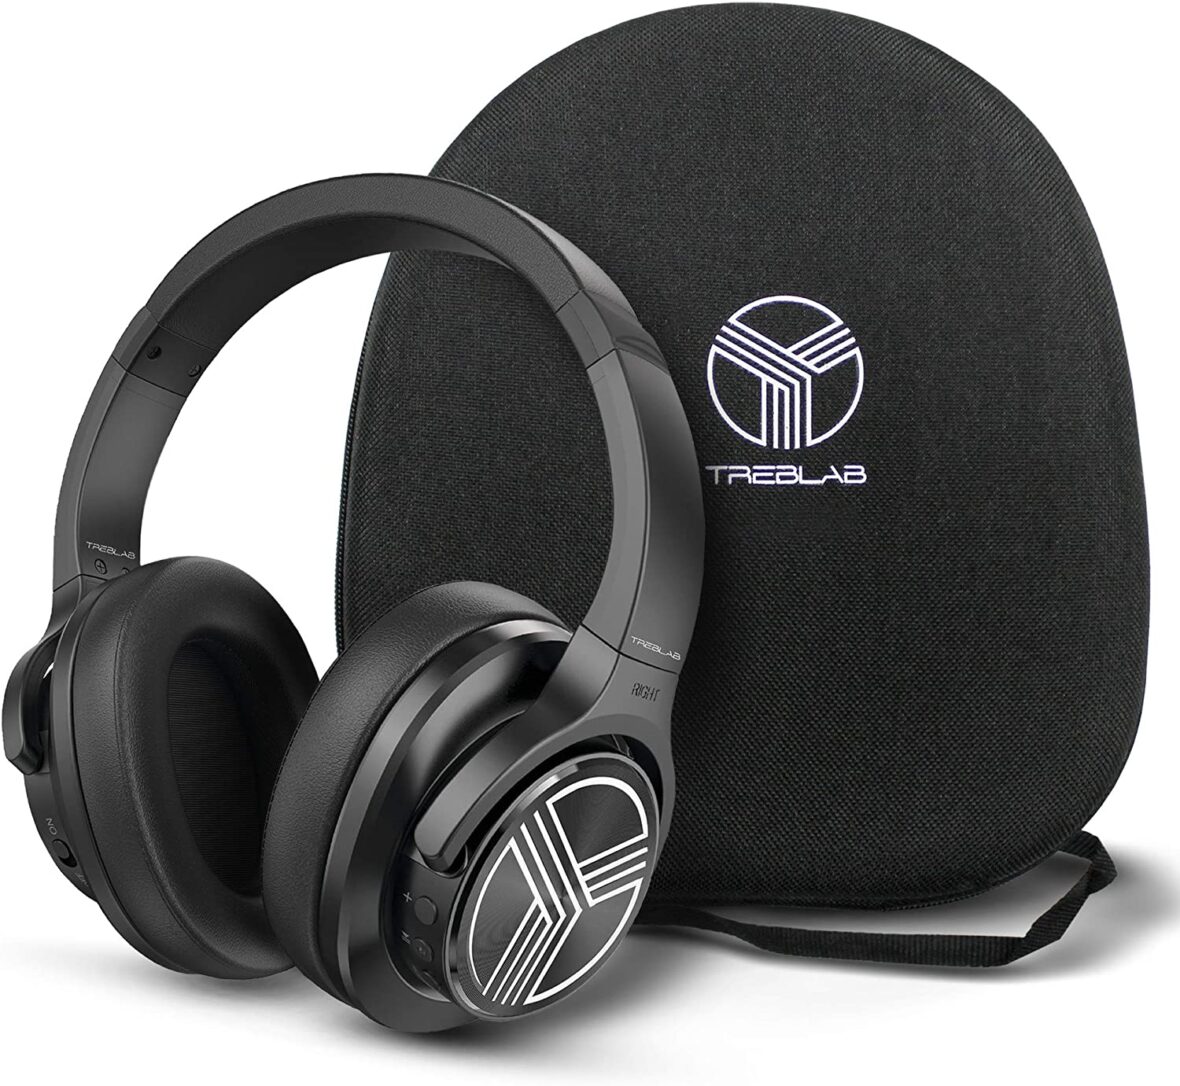 Best Upper Mid-Range Over-Ear Headphones for Working Out